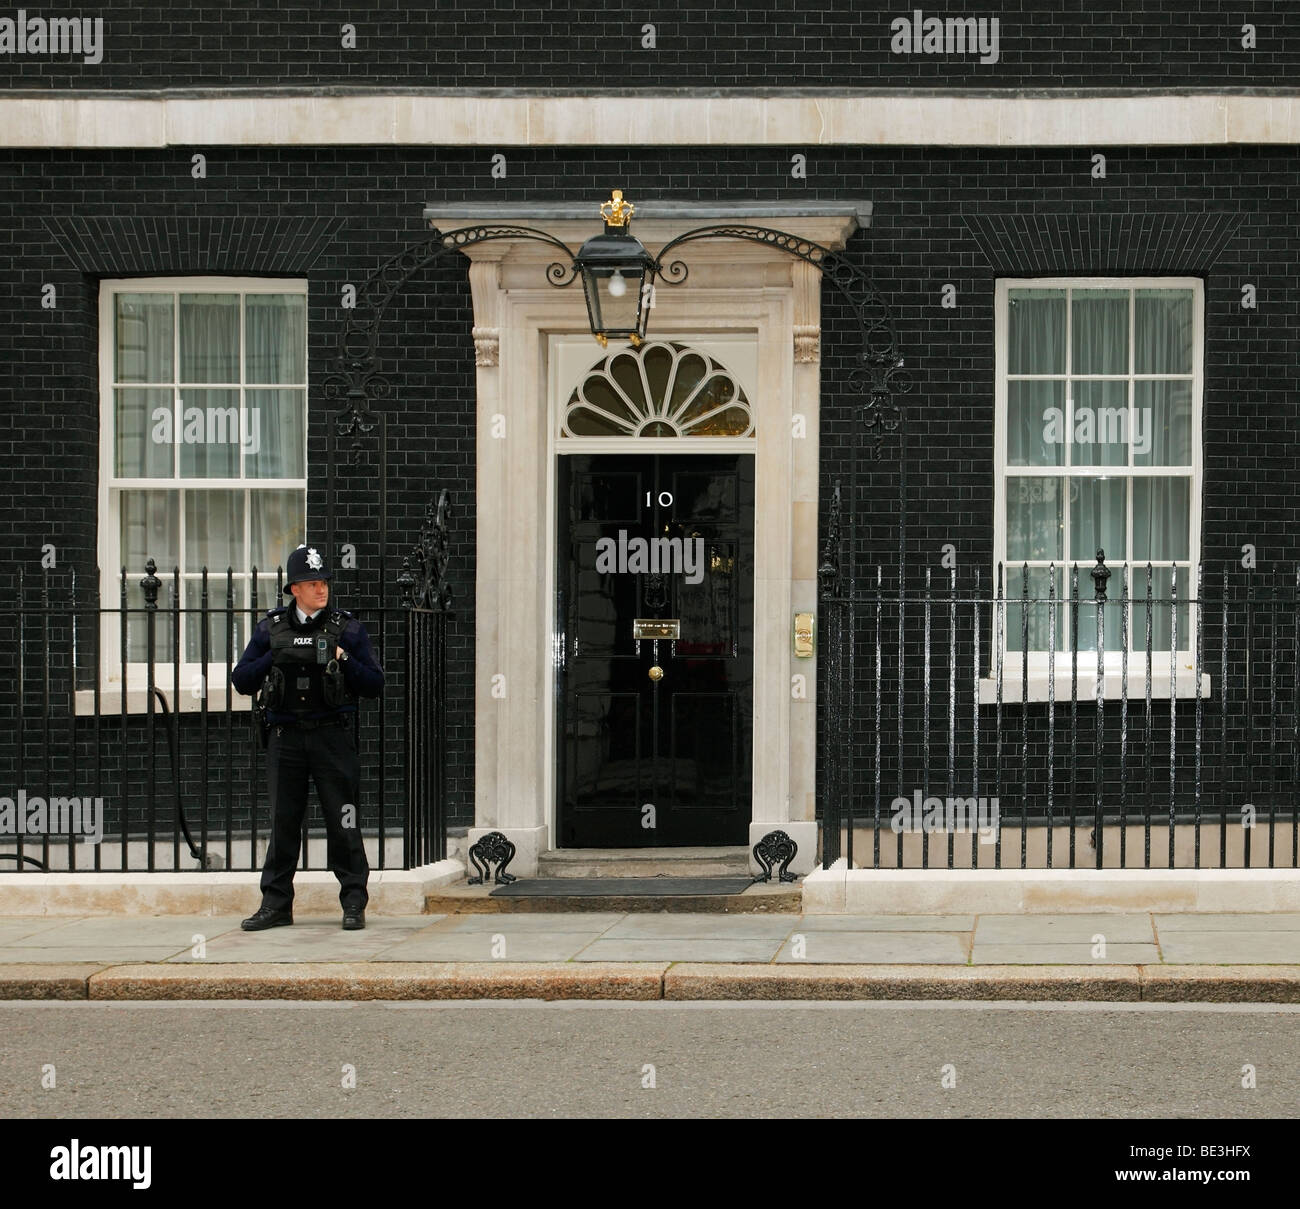 10 Downing street, Whitehall, Westminster, Londra, Inghilterra, Regno Unito. Foto Stock